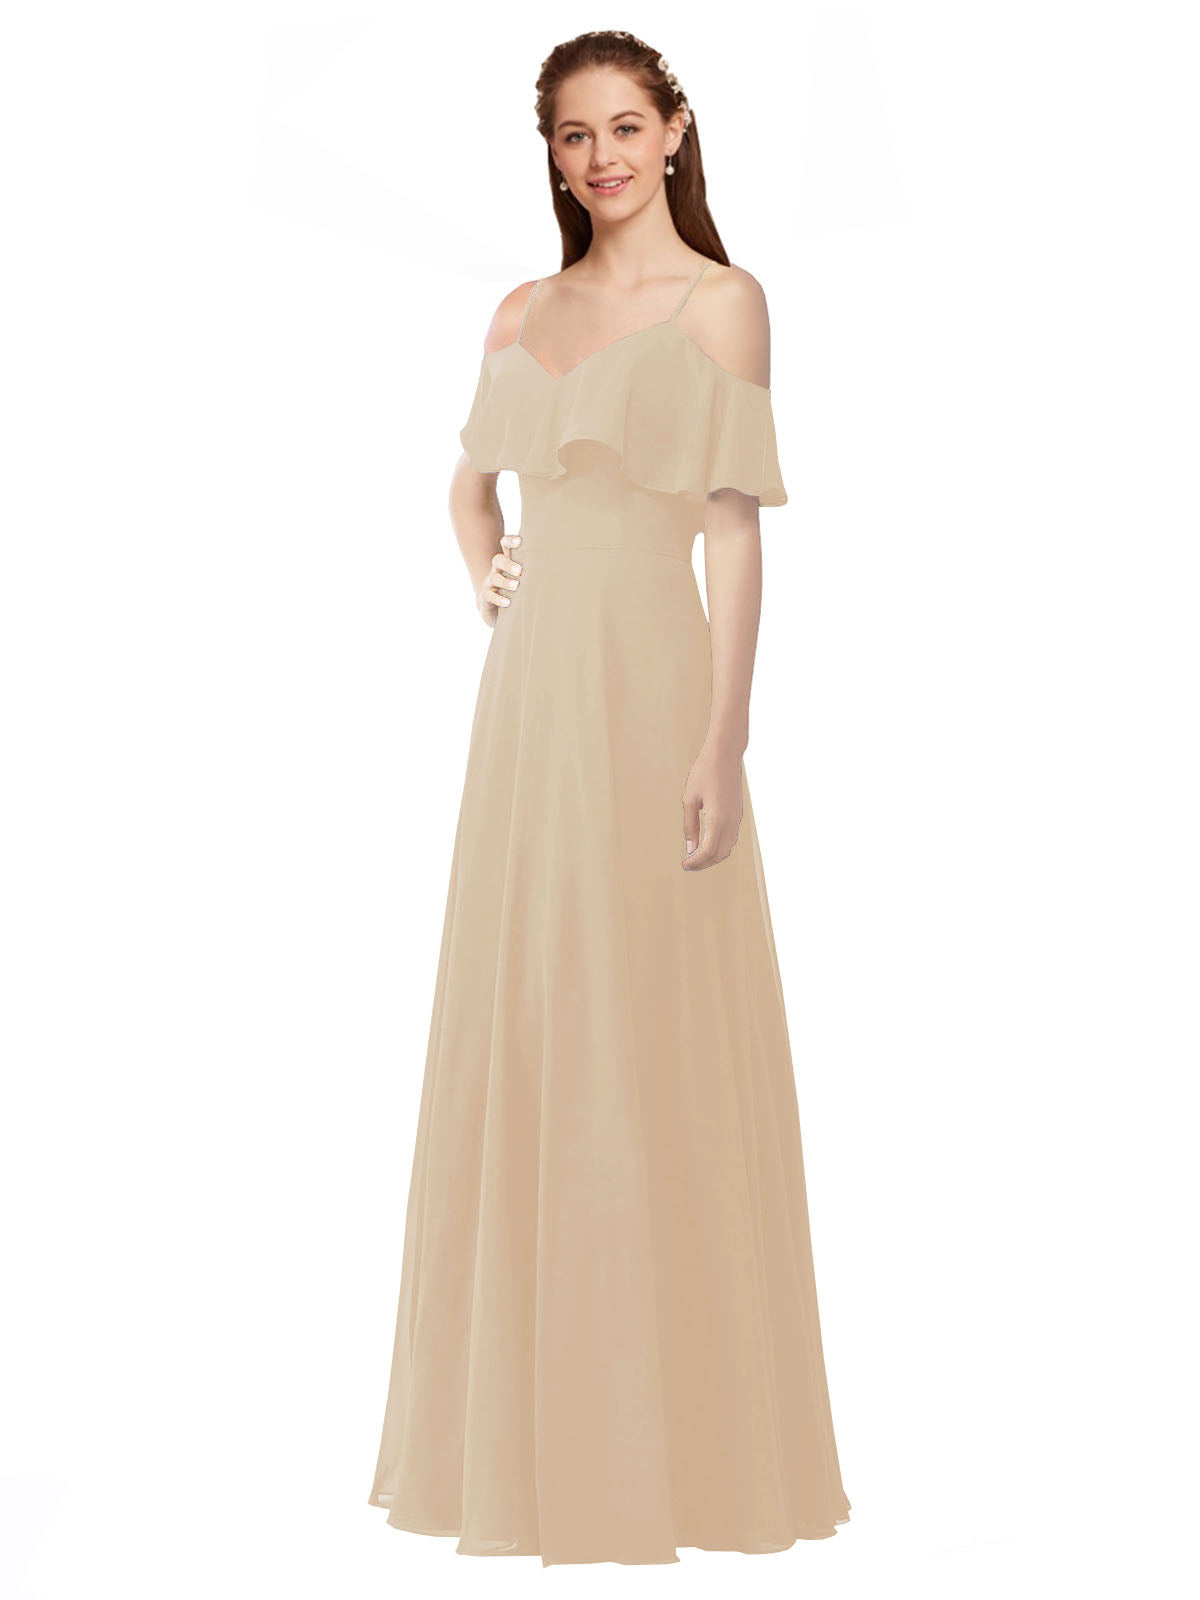 Champagne A-Line Off the Shoulder V-Neck Sleeveless Long Bridesmaid Dress Marianna